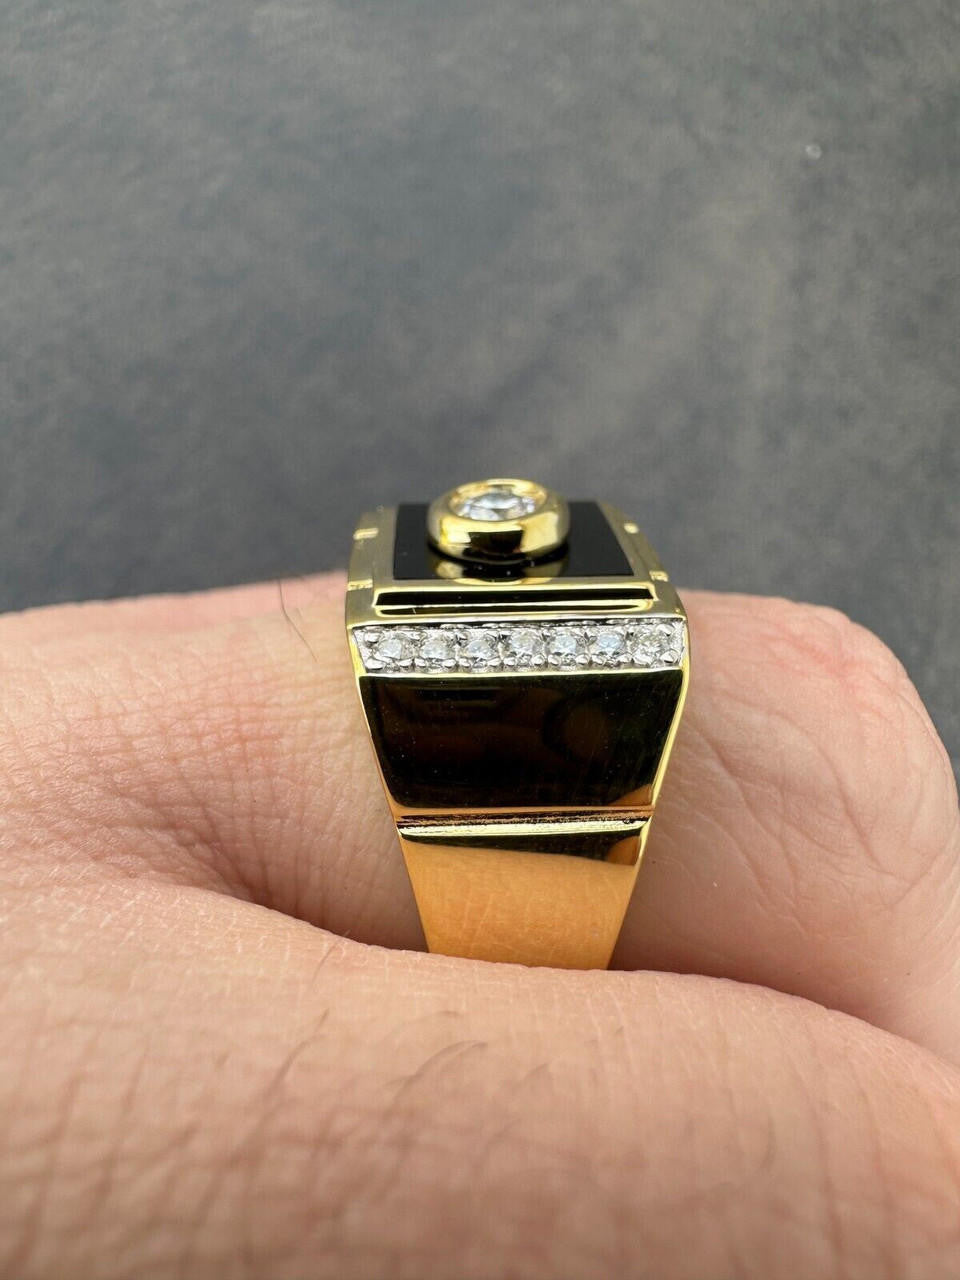 Men's 14k Gold Over Solid 925 Silver Black Onyx Ring ICY Pinky Diamond Sz 7-12 (CZ)